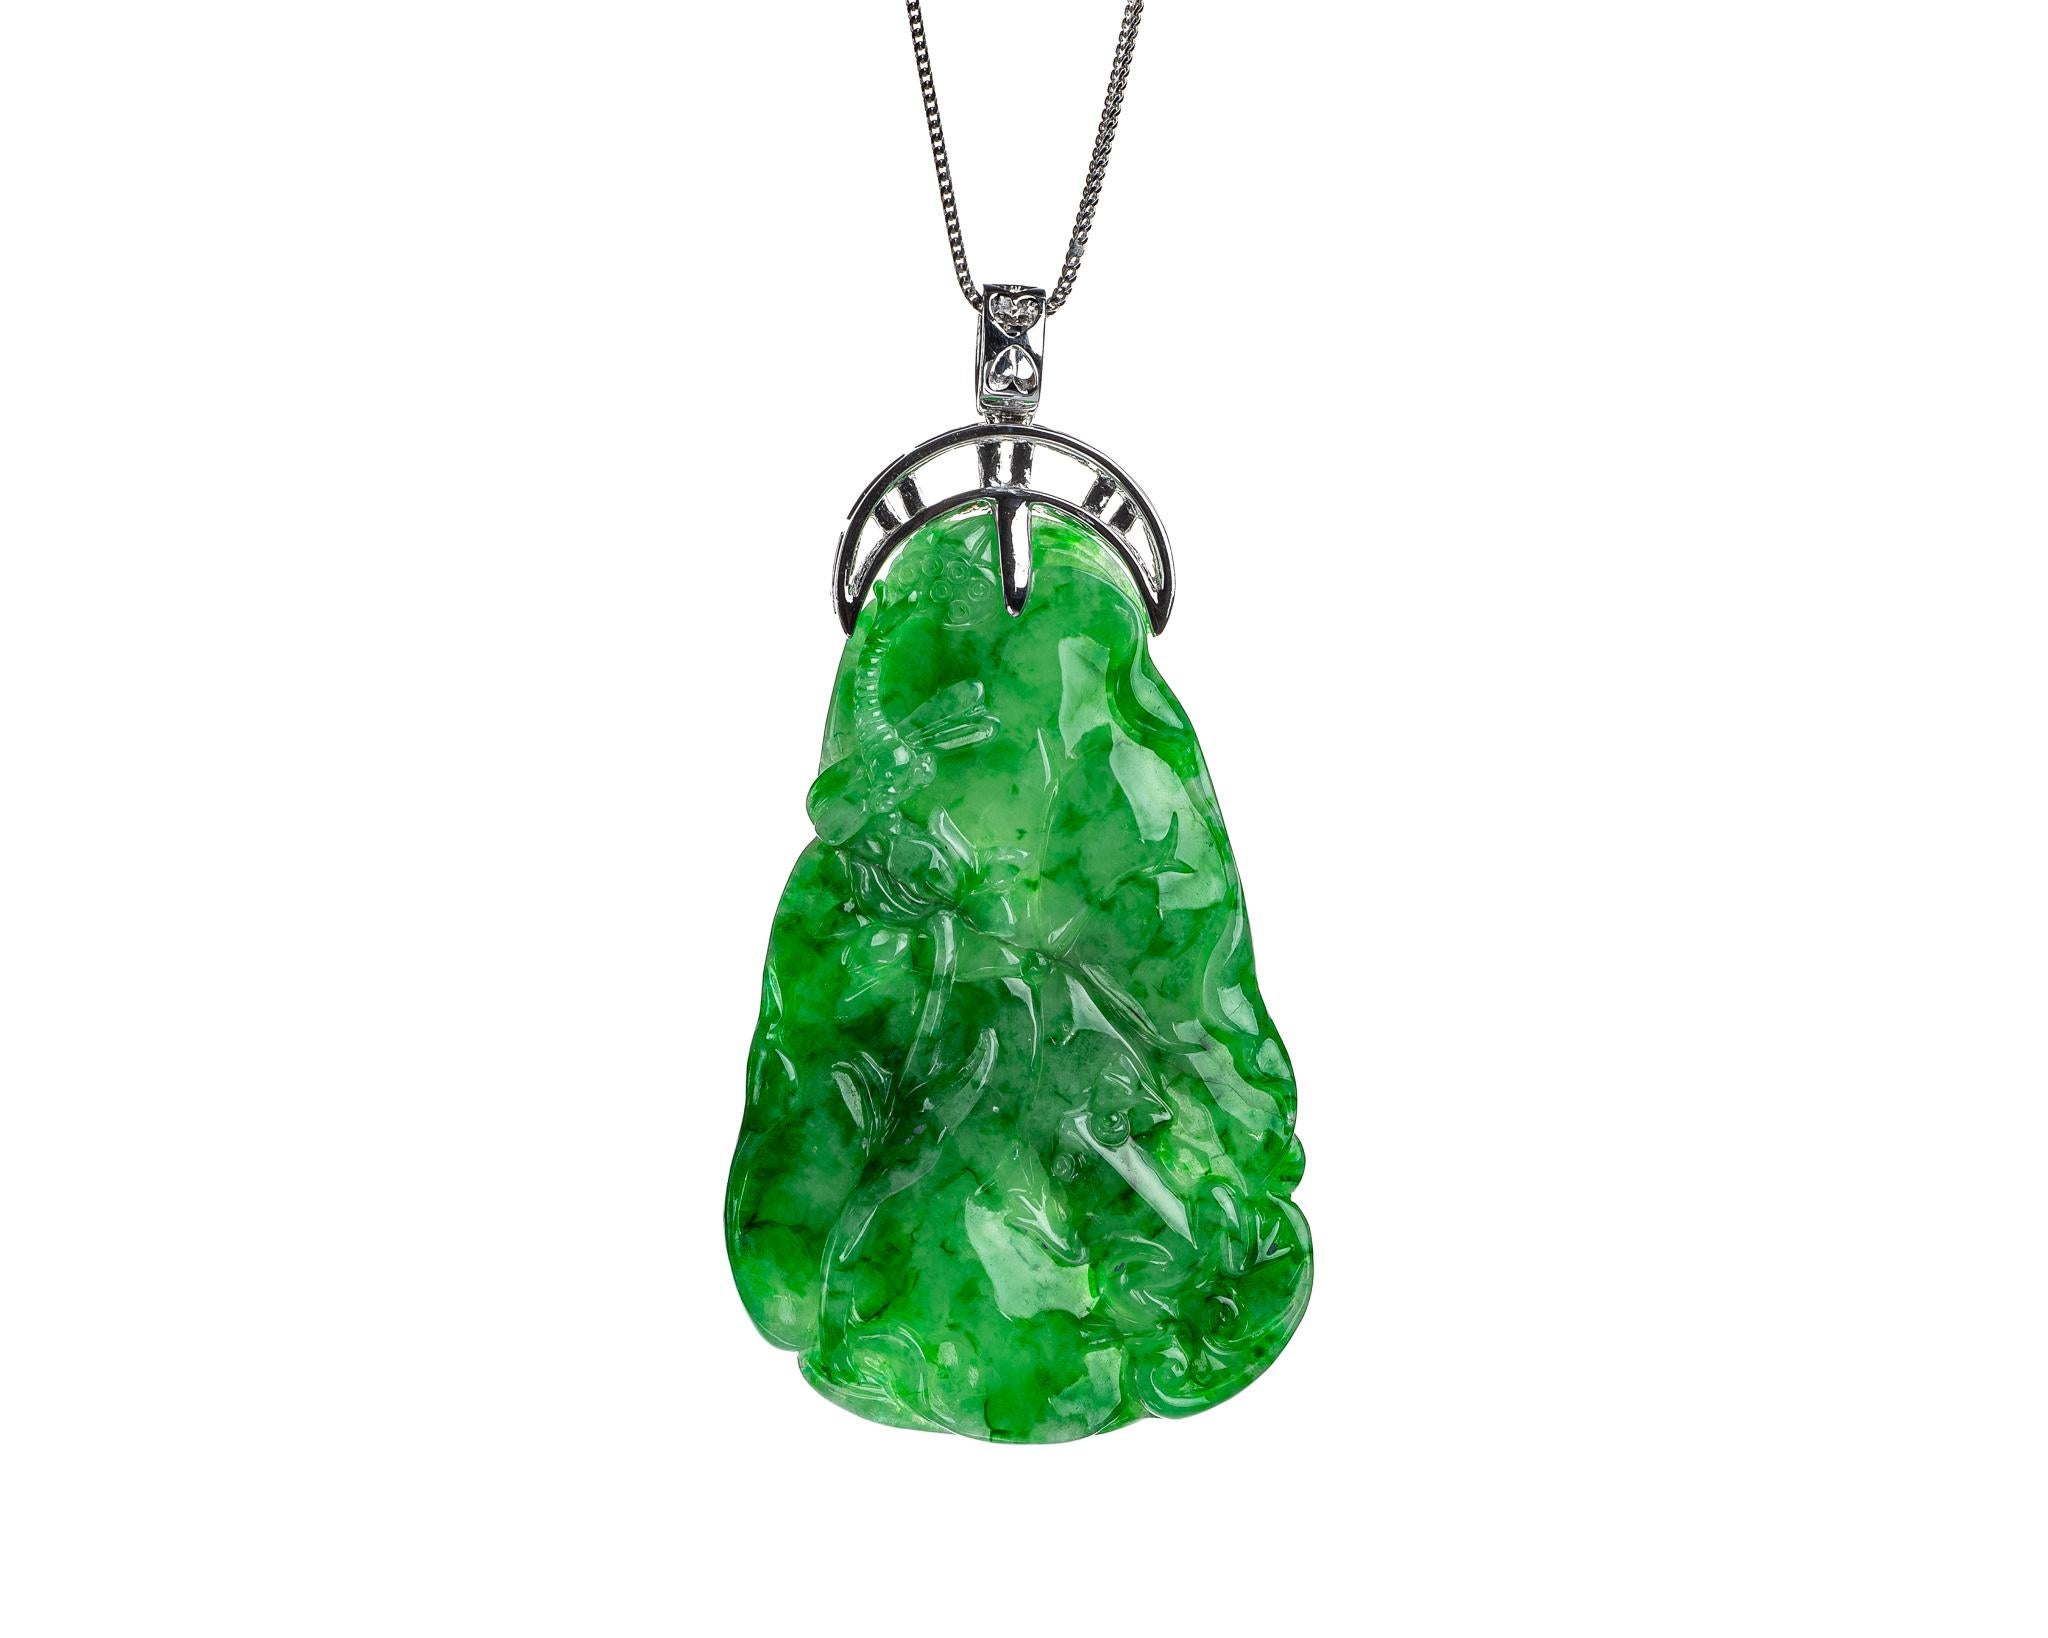 This is an all natural, untreated jadeite jade carved lotus leaf and dragonfly pendant set on an 18K white gold bail.  The carved lotus leaf symbolizes purity and enlightenment.   

It measures 1.52 inches (38.8mm) x 2.39 inches (60.7mm) with